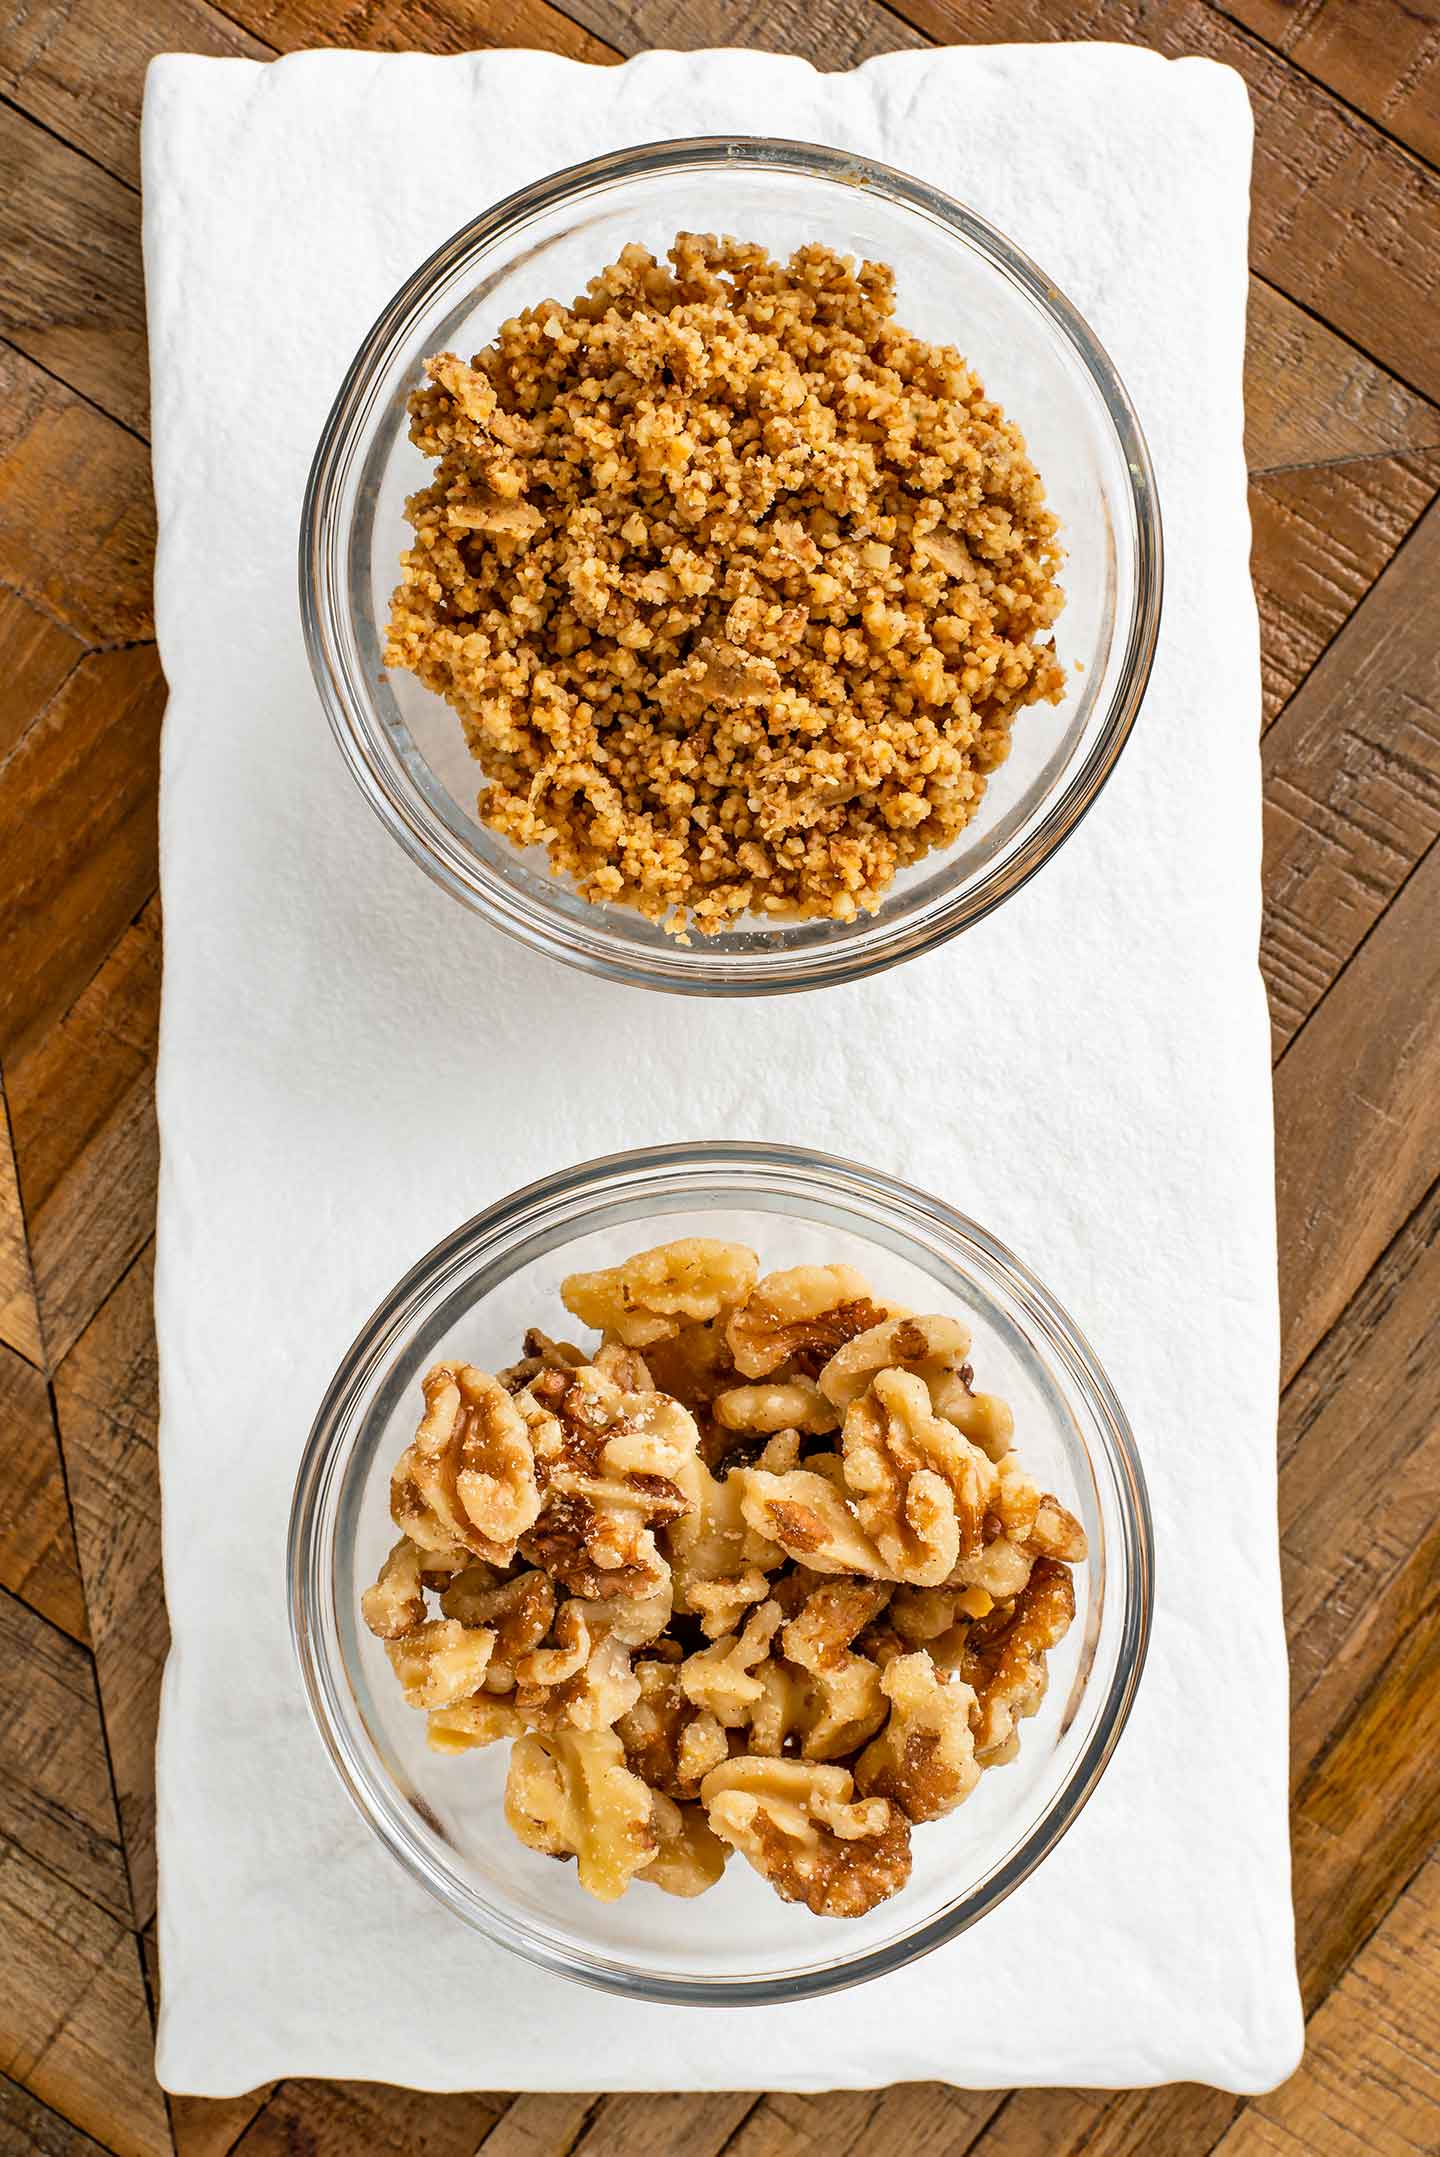 Top down view of two small bowls of walnuts. One bowl has halved raw walnuts and the other has toasted and ground walnuts.